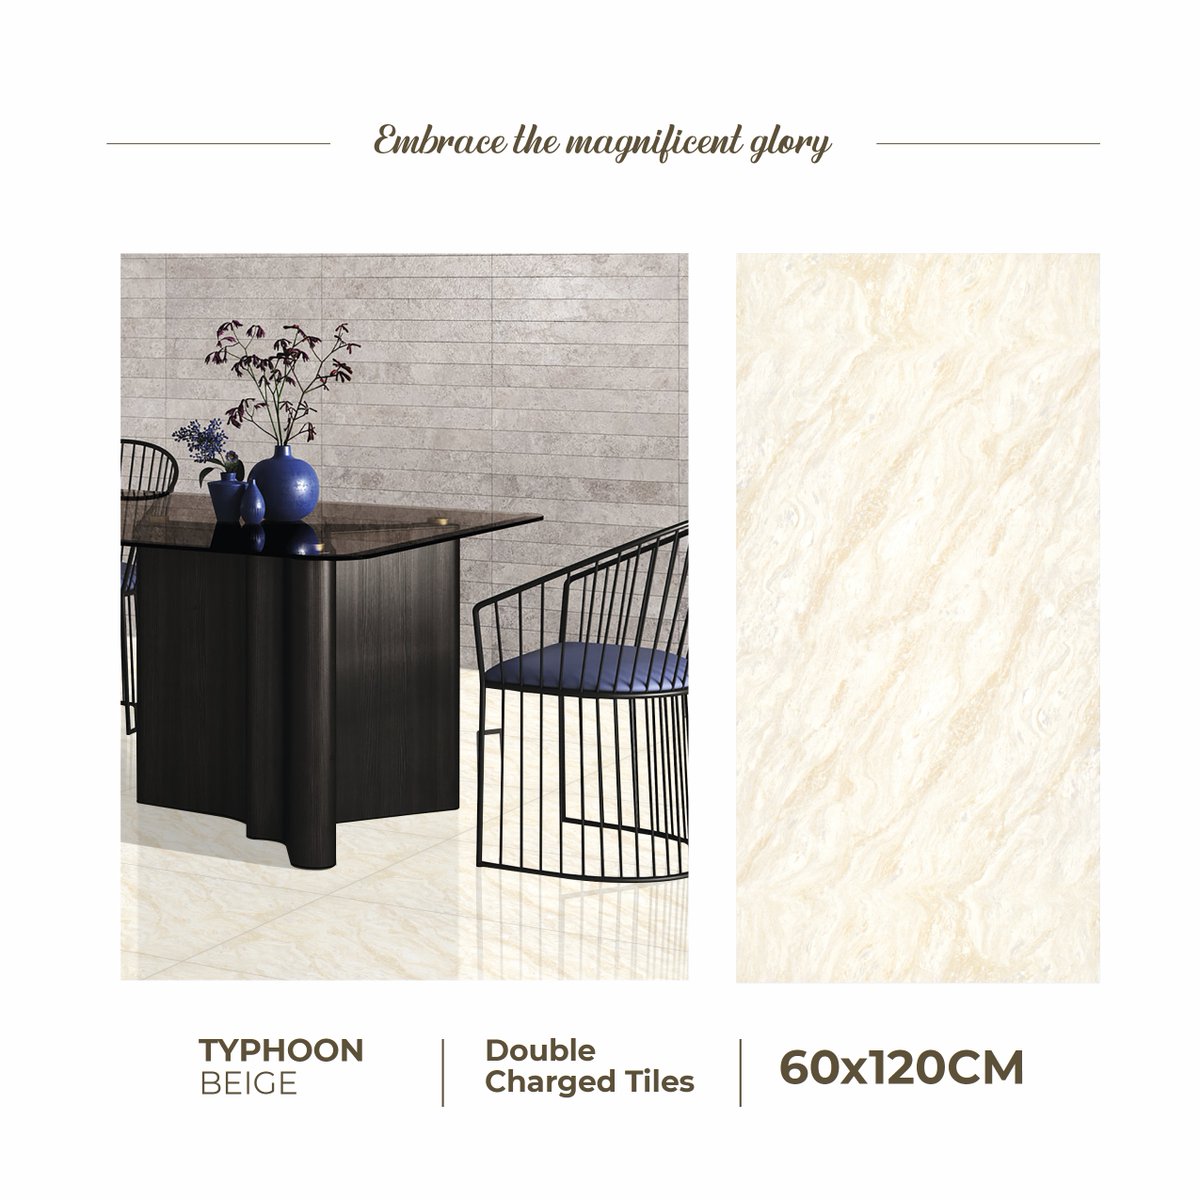 Embrace the magnificient Glosry with Multistone Granito.
𝐓𝐲𝐩𝐡𝐨𝐨𝐧 𝐁𝐞𝐢𝐠𝐞 || 𝐃𝐨𝐮𝐛𝐥𝐞 𝐂𝐡𝐚𝐫𝐠𝐞𝐝 𝐓𝐢𝐥𝐞𝐬 || 𝟔𝟎 𝐱 𝟏𝟐𝟎 𝐂𝐌
Place the Order now!
𝐂𝐨𝐧𝐭𝐚𝐜𝐭: +91 98257 20651

𝐄𝐦𝐚𝐢𝐥: multistoneinfo@gmail.com